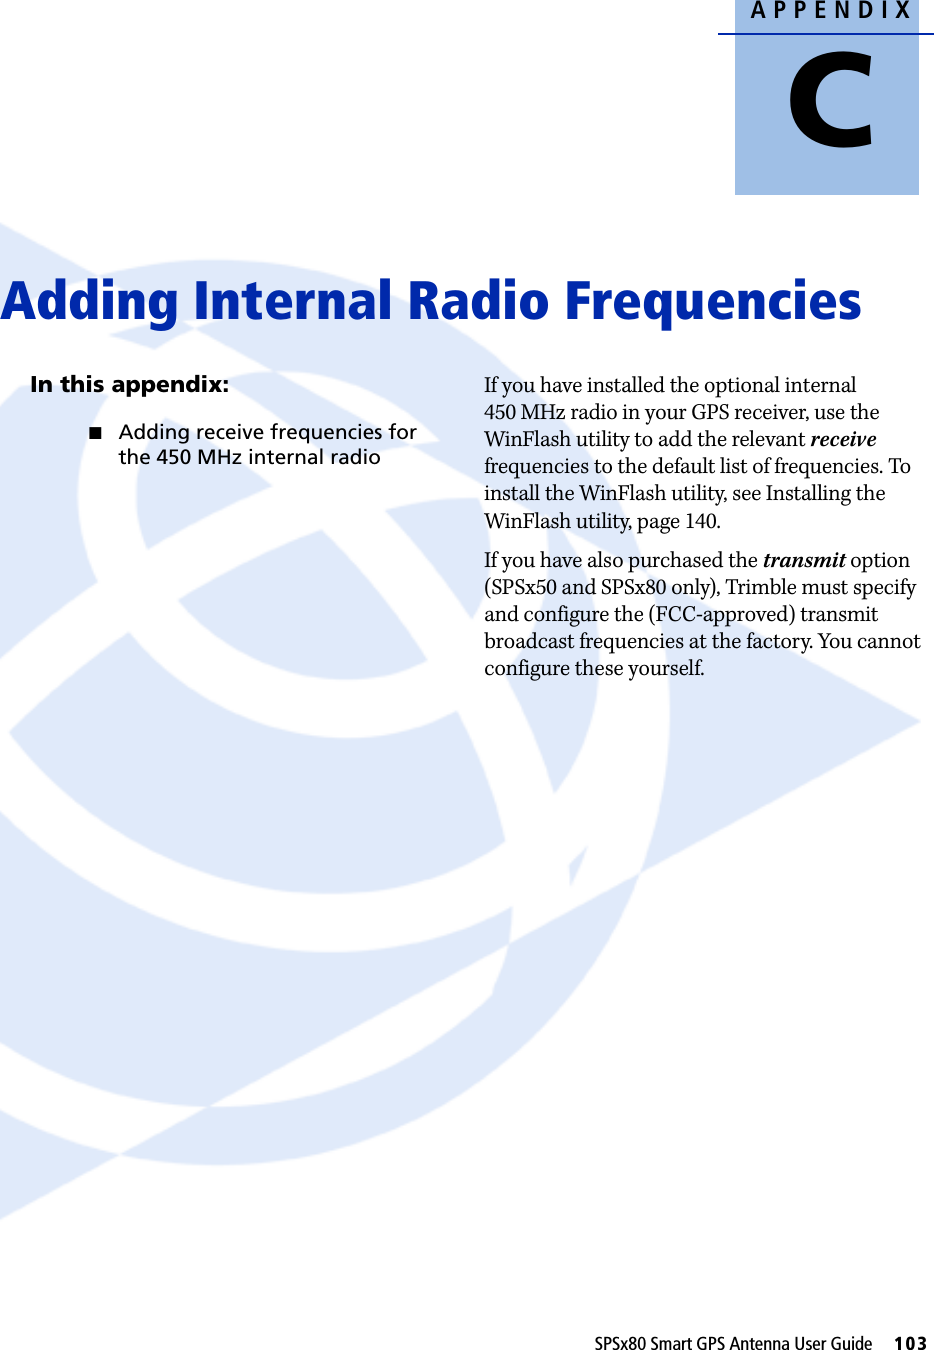 APPENDIXCSPSx80 Smart GPS Antenna User Guide     103Adding Internal Radio Frequencies CIn this appendix:QAdding receive frequencies for the 450 MHz internal radioIf you have installed the optional internal 450 MHz radio in your GPS receiver, use the WinFlash utility to add the relevant receive frequencies to the default list of frequencies. To install the WinFlash utility, see Installing the WinFlash utility, page 140.If you have also purchased the transmit option (SPSx50 and SPSx80 only), Trimble must specify and configure the (FCC-approved) transmit broadcast frequencies at the factory. You cannot configure these yourself.